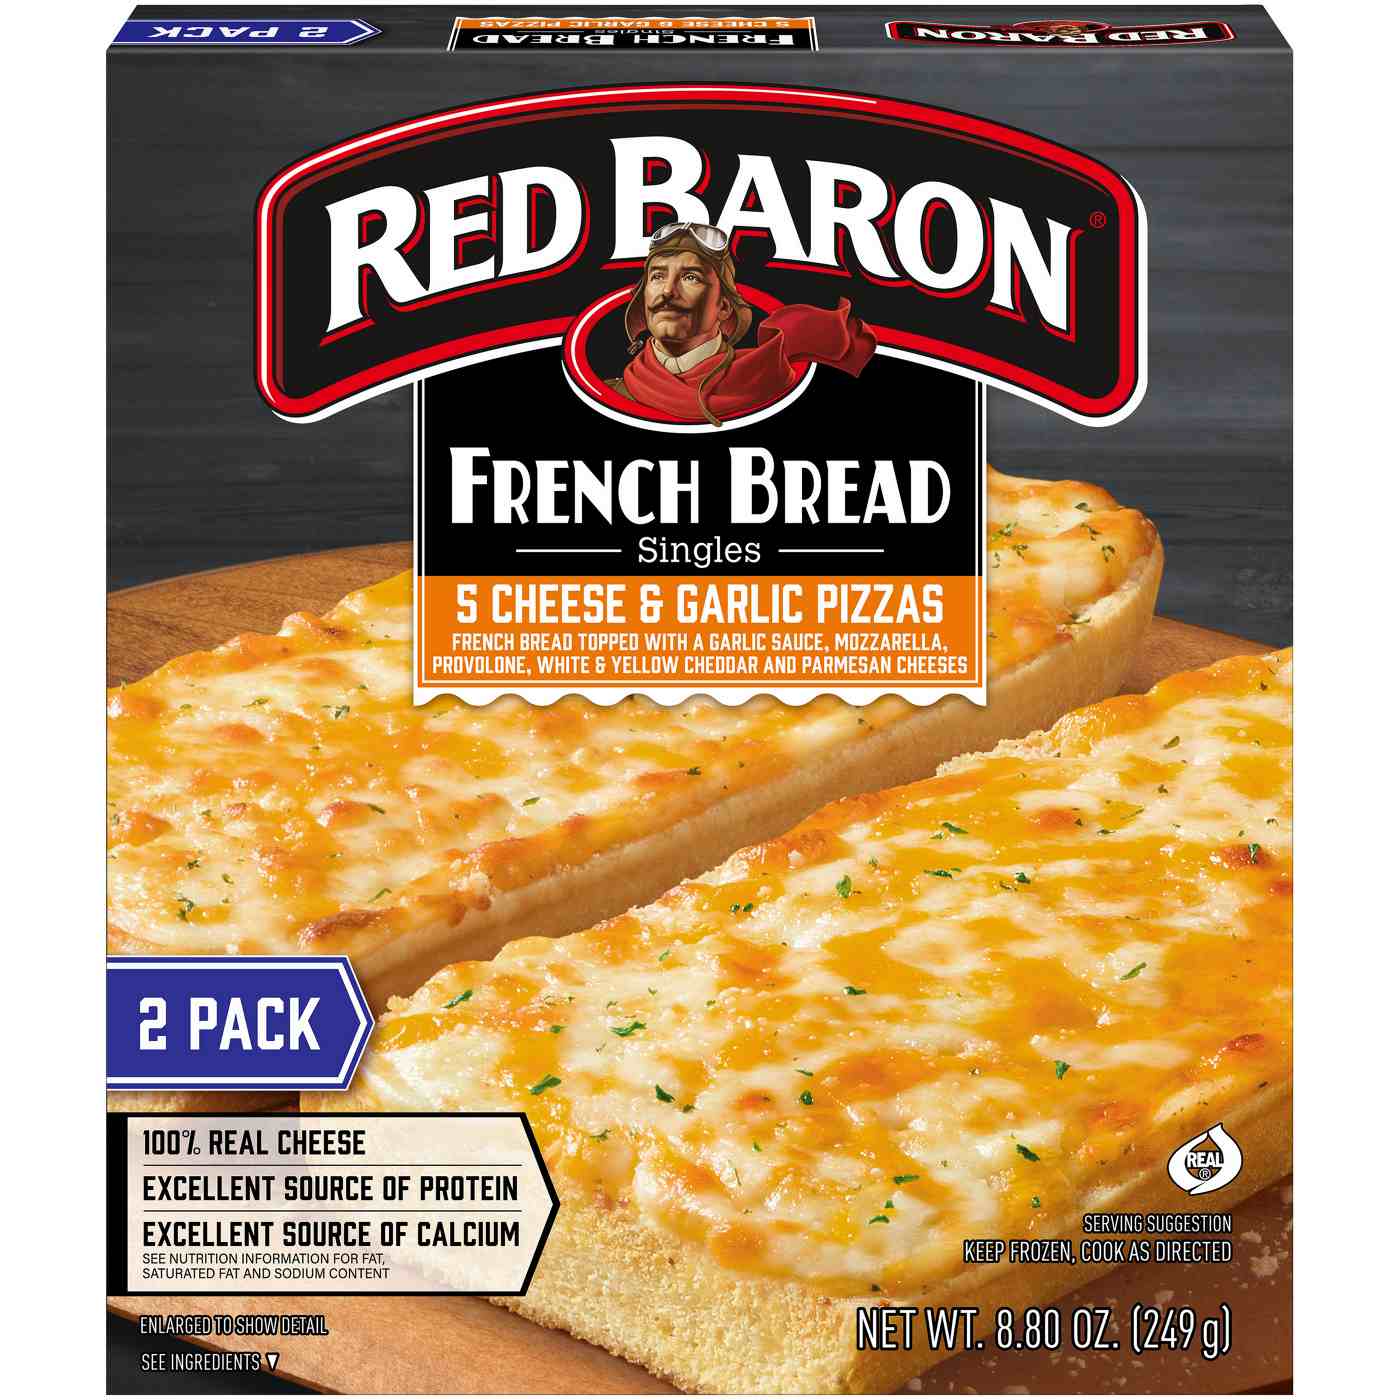 Red Baron French Bread Frozen Pizza Singles - 5 Cheese & Garlic; image 1 of 2